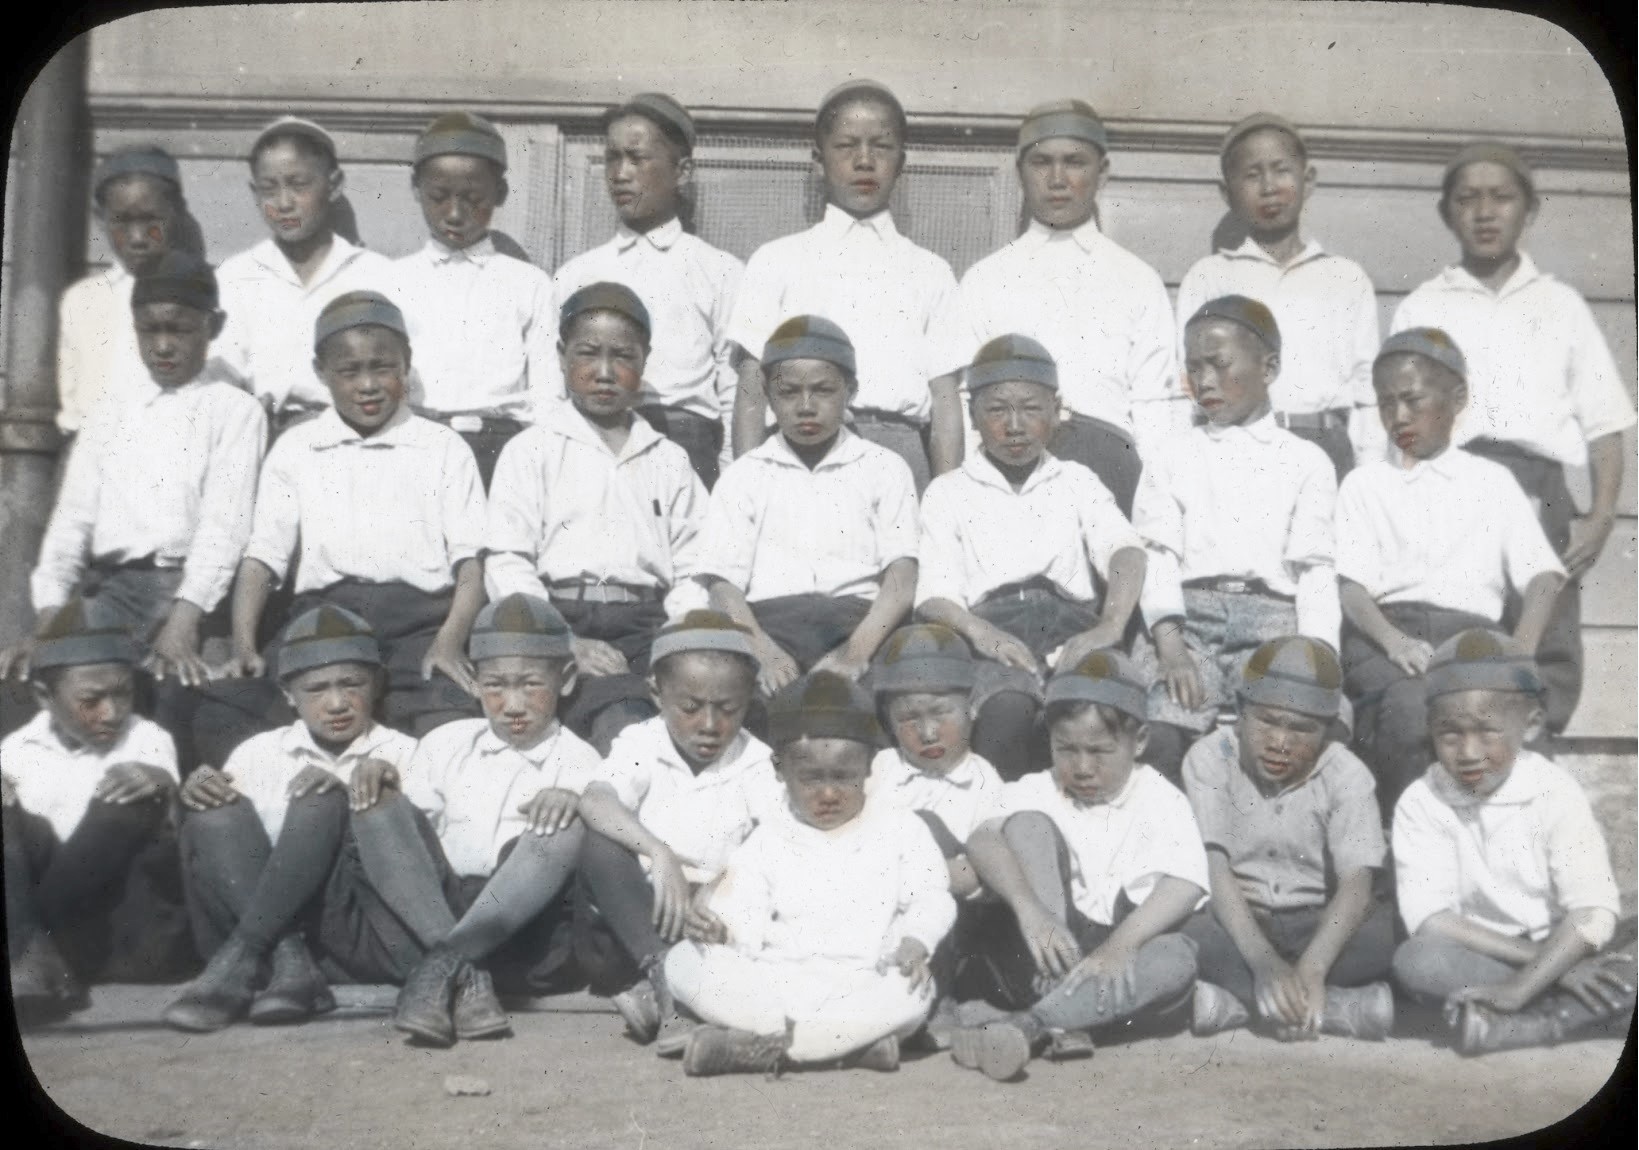 A group photo shows some of the boys who lived in the Chung Mei Boys Home.